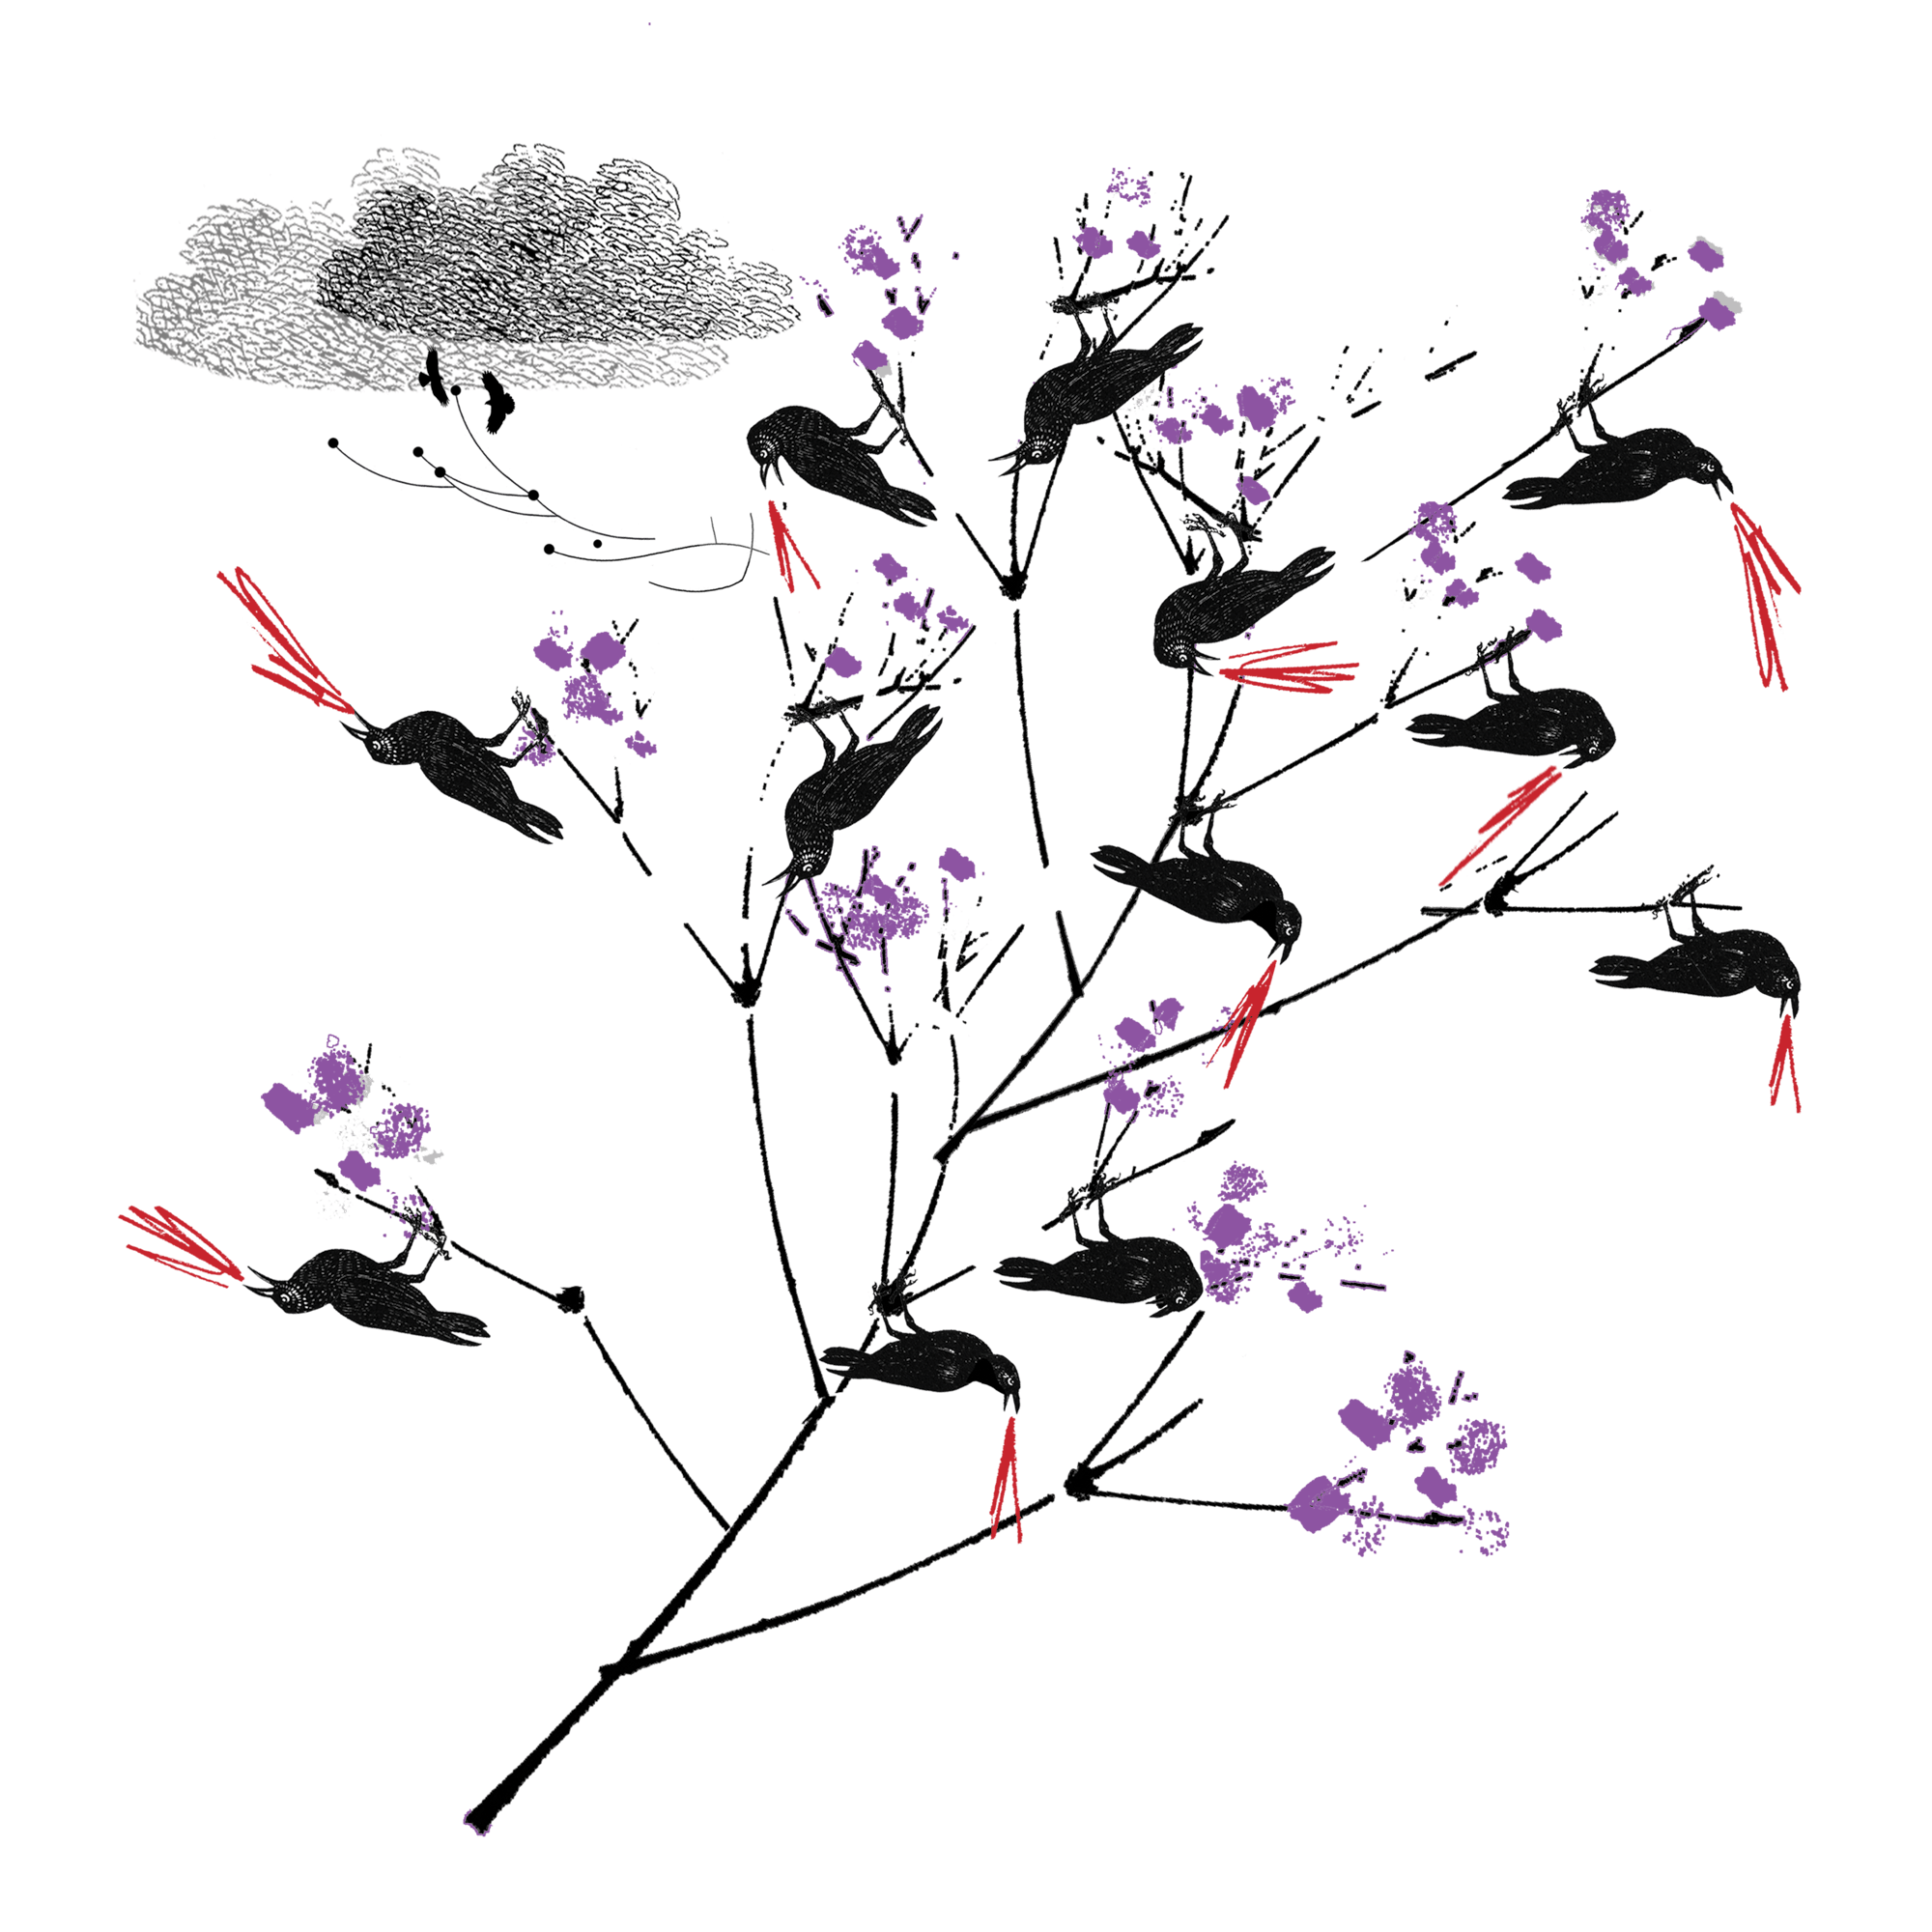 Some black crows perch in a thin tree with purple flowers.